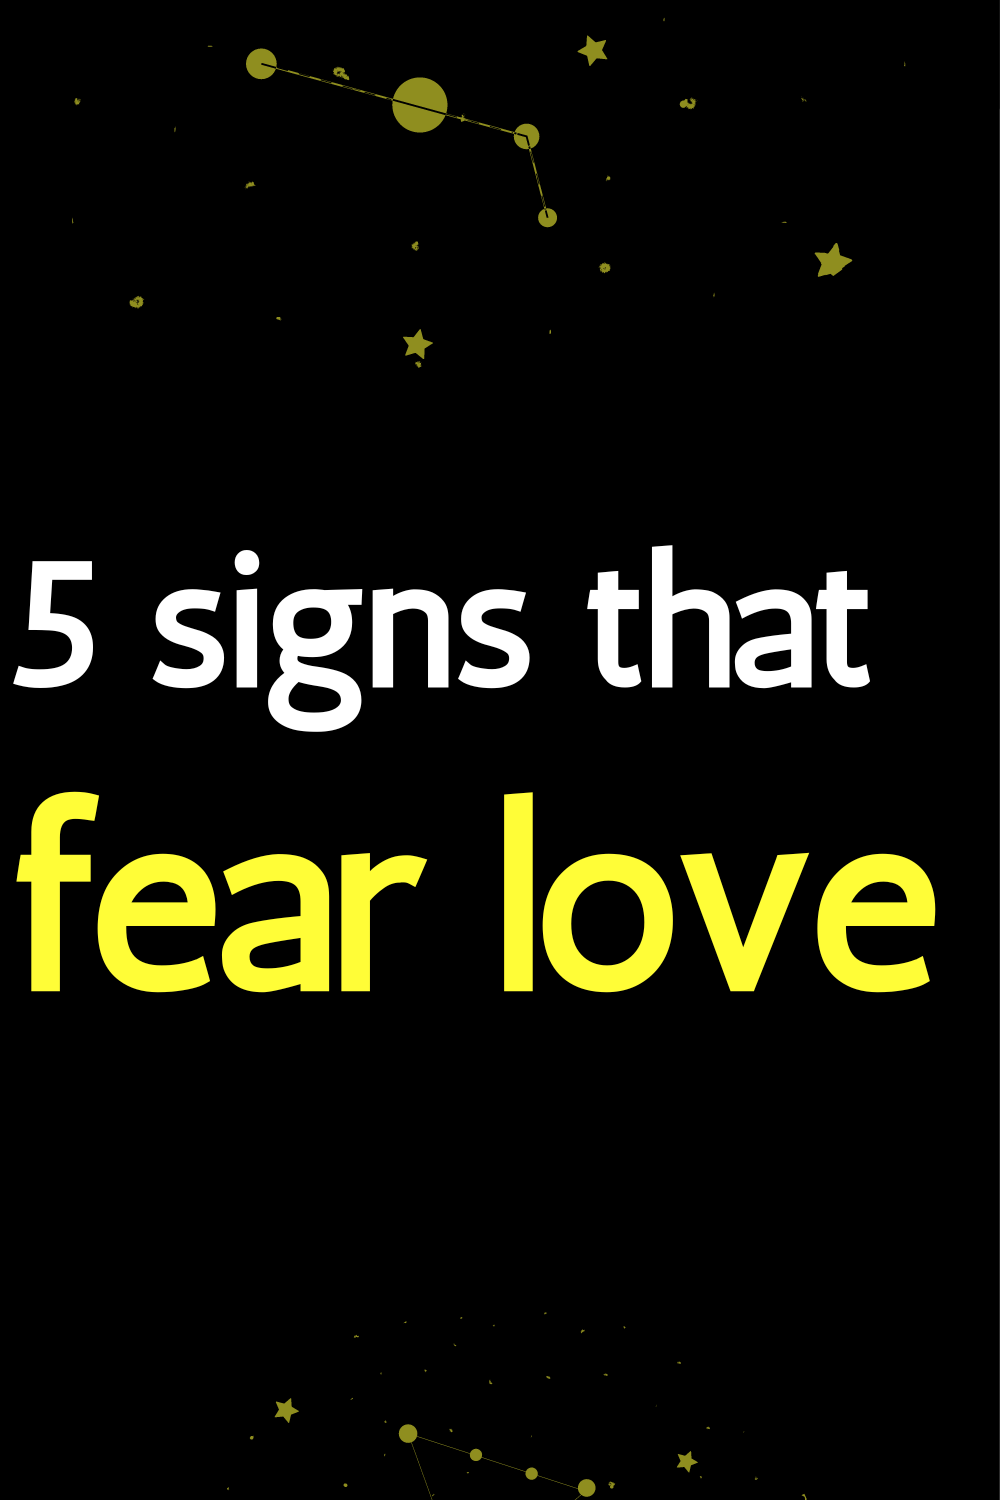 5 signs that fear love